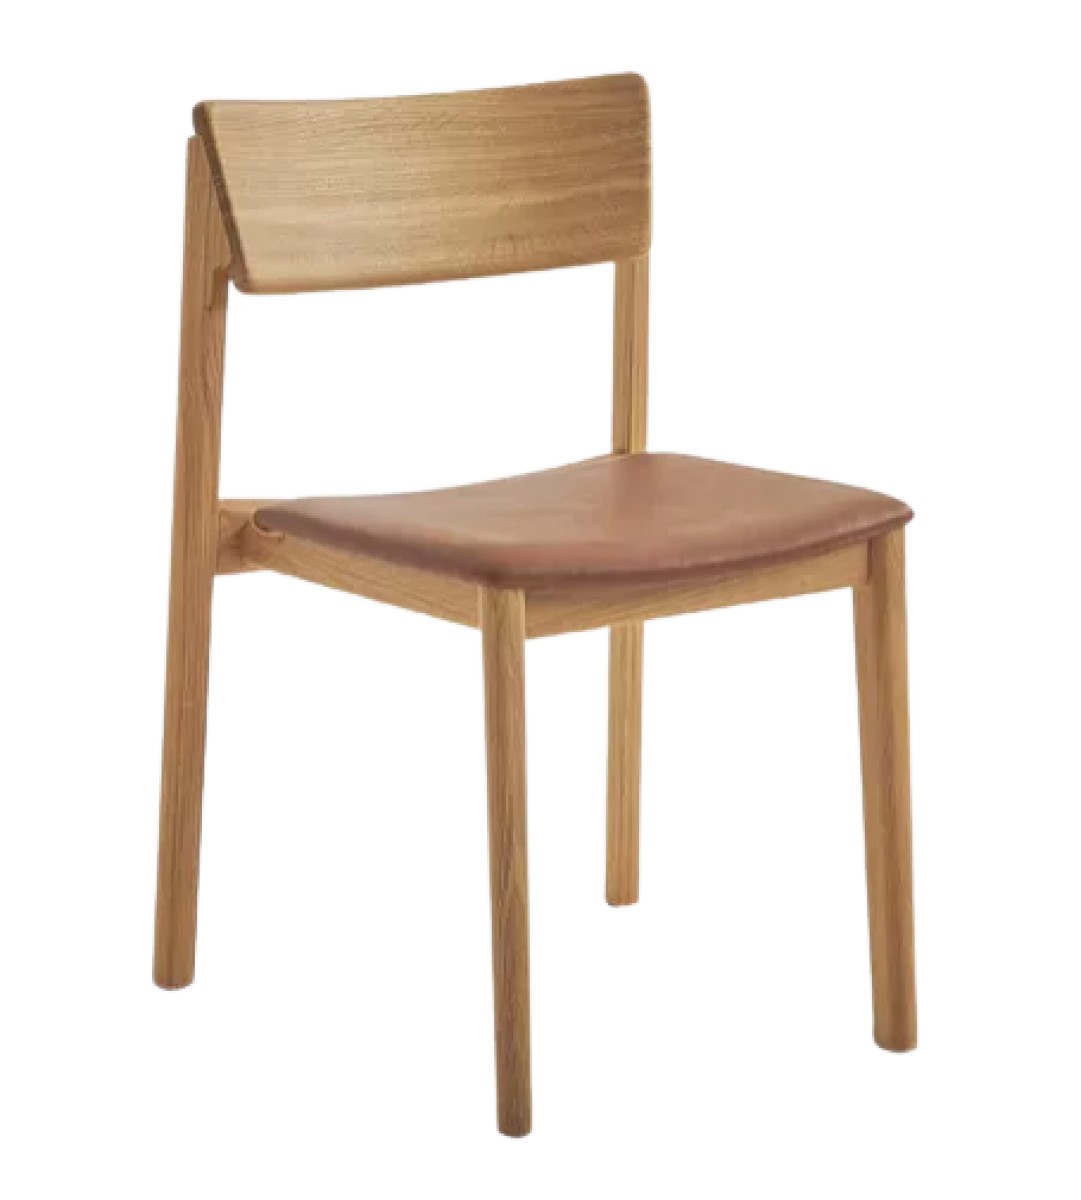 Poise Chair - Upholstered Seat